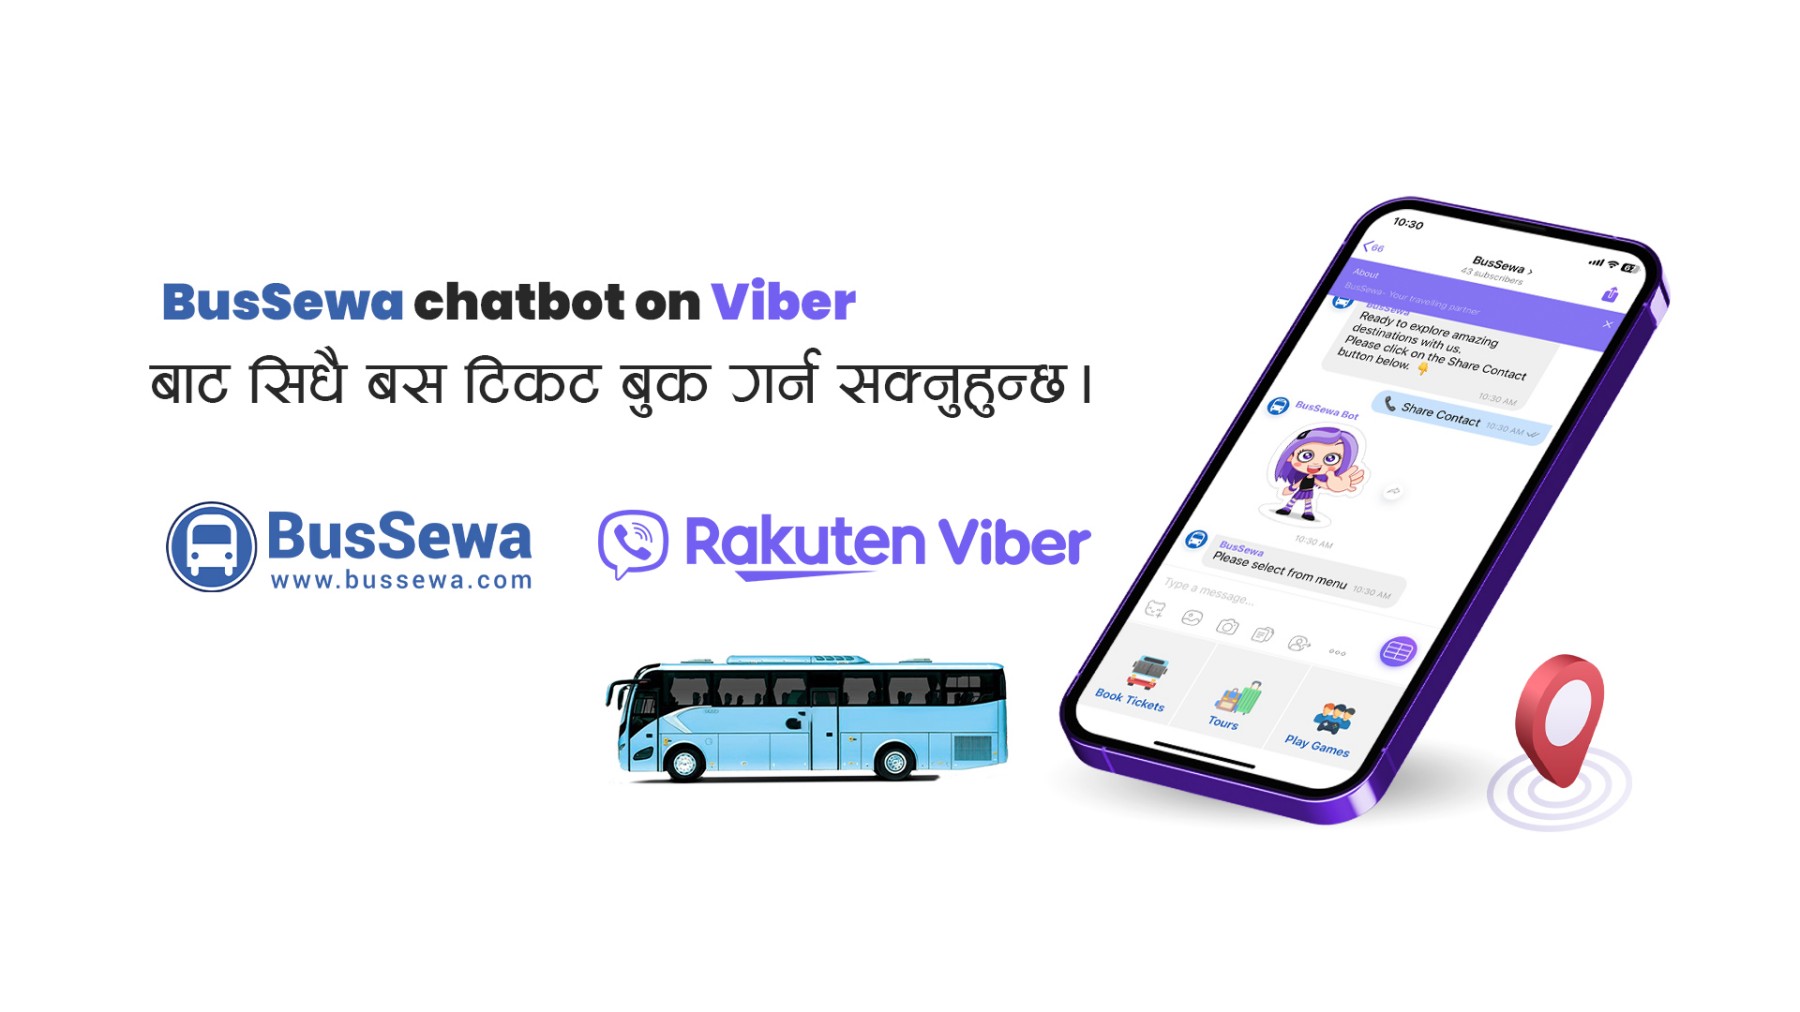 BusSewa tickets can now be purchased online through Viber